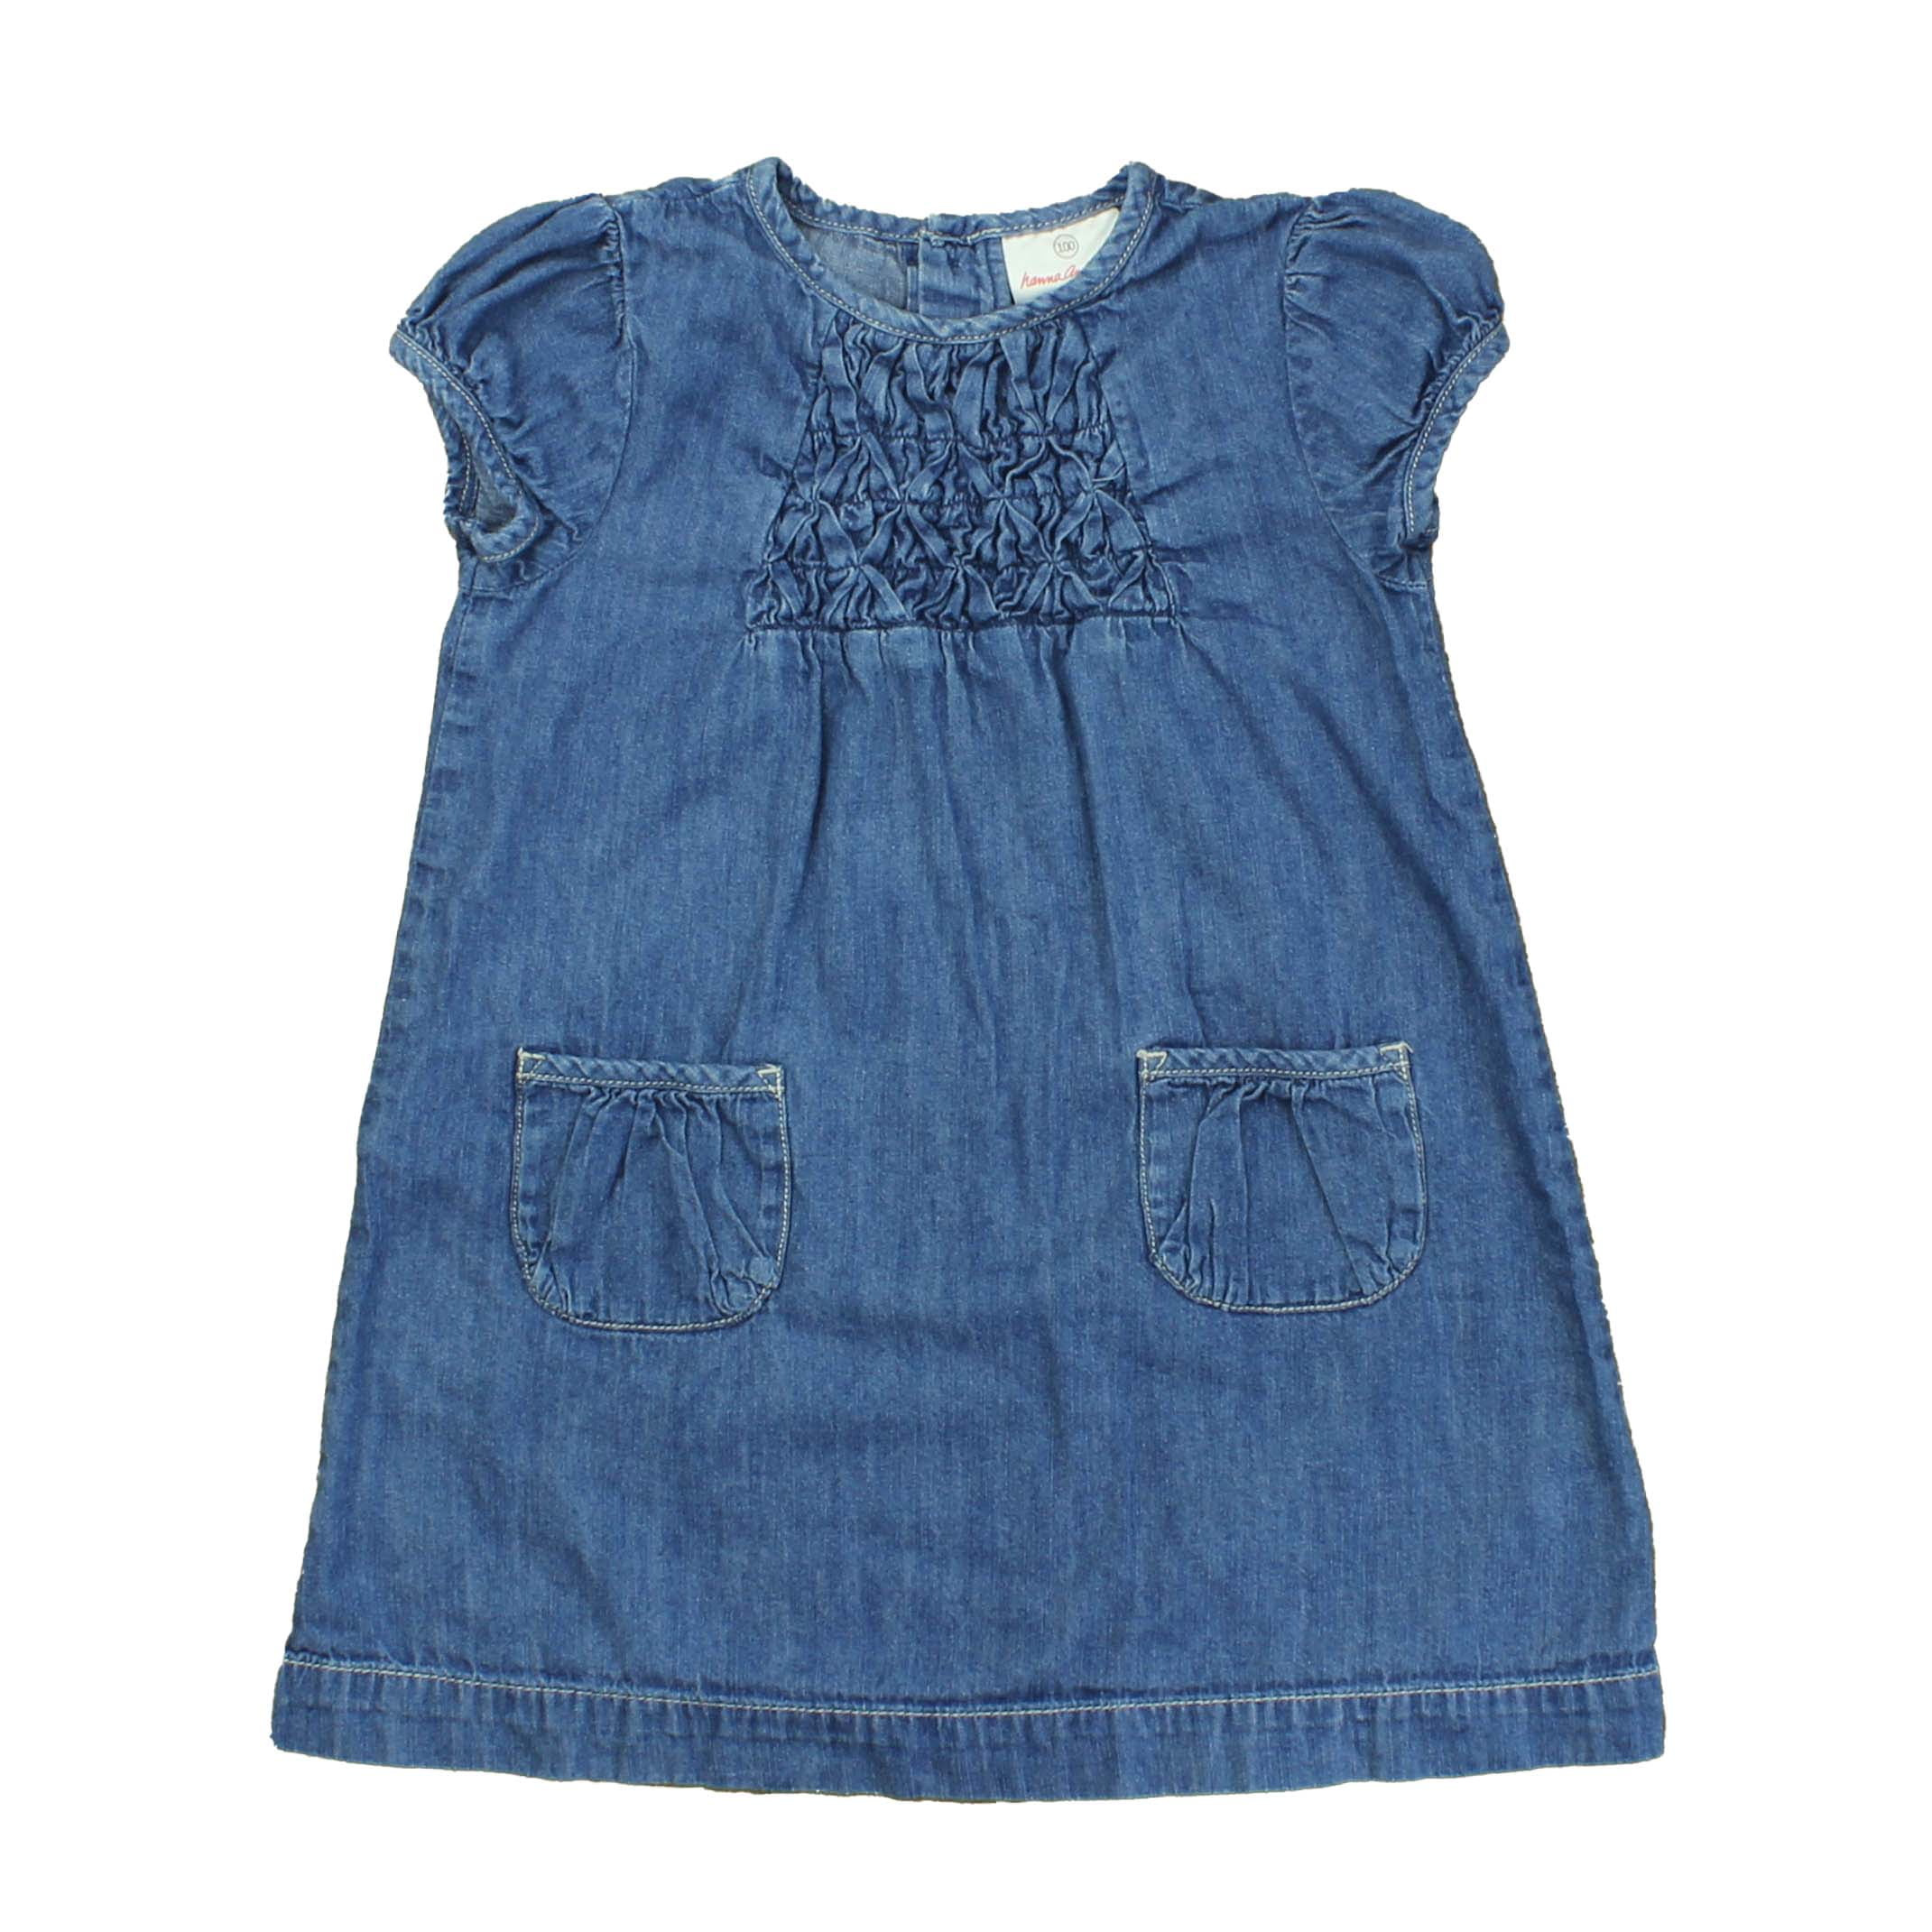 Dress size: 4T - The Swoondle Society